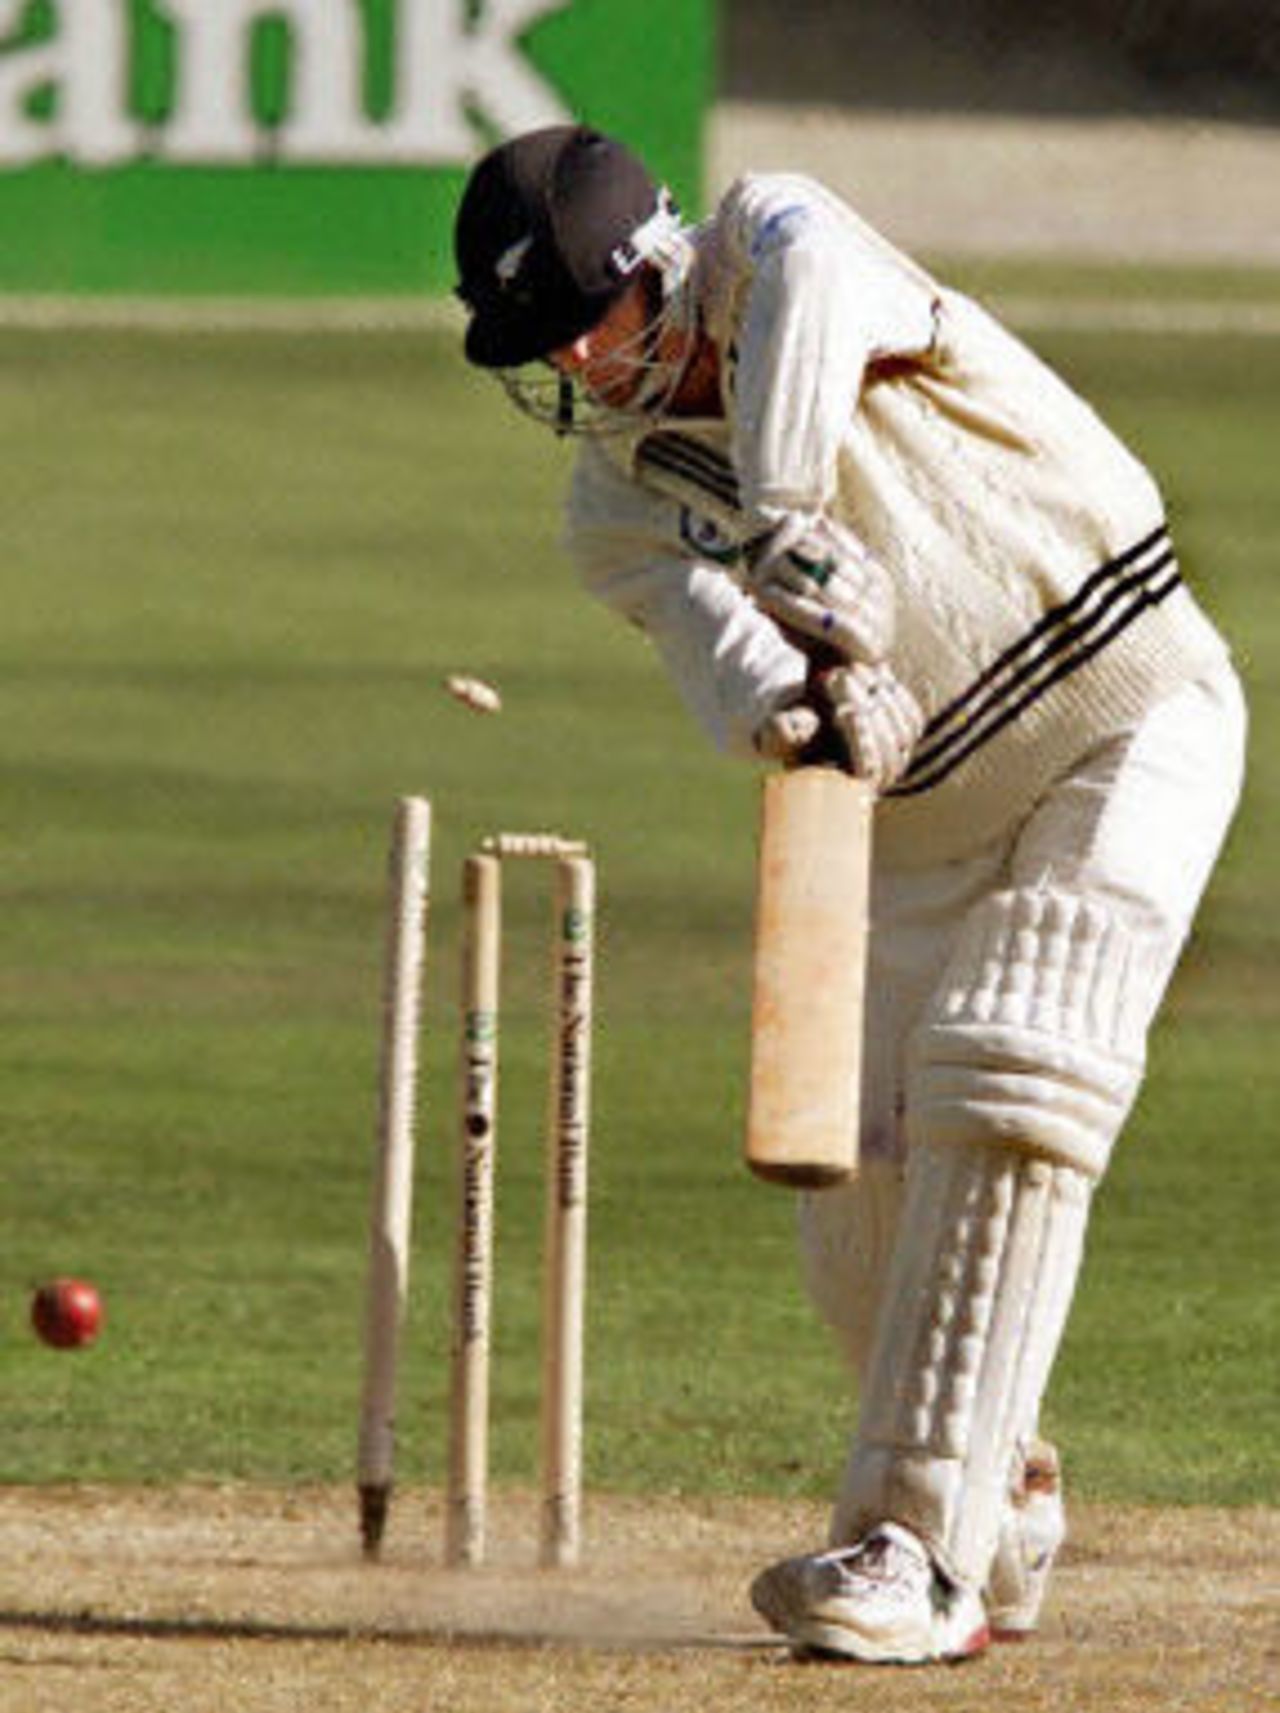 Chris Martin is bowled by Waqar Younis, day 2, 2nd Test at Christchurch, 15-19 March 2001.